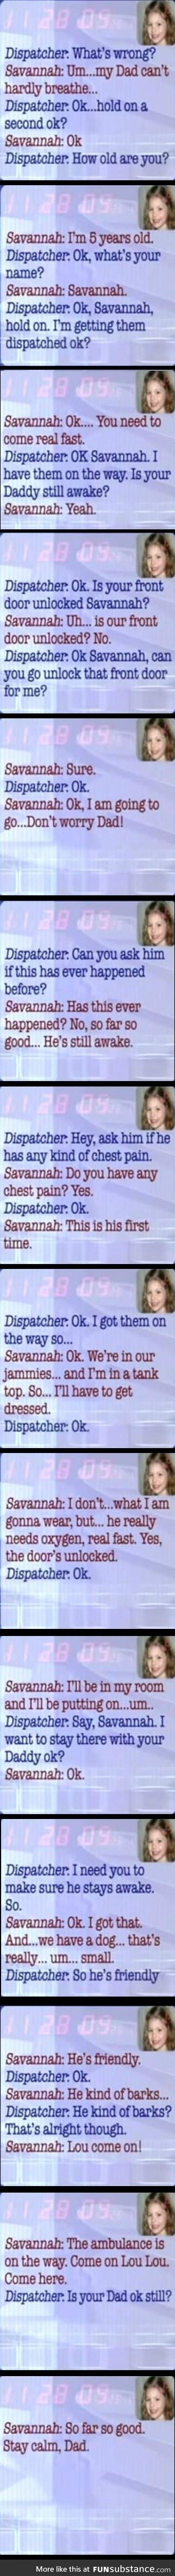 5 year old stays calm, trying to save her dad's life